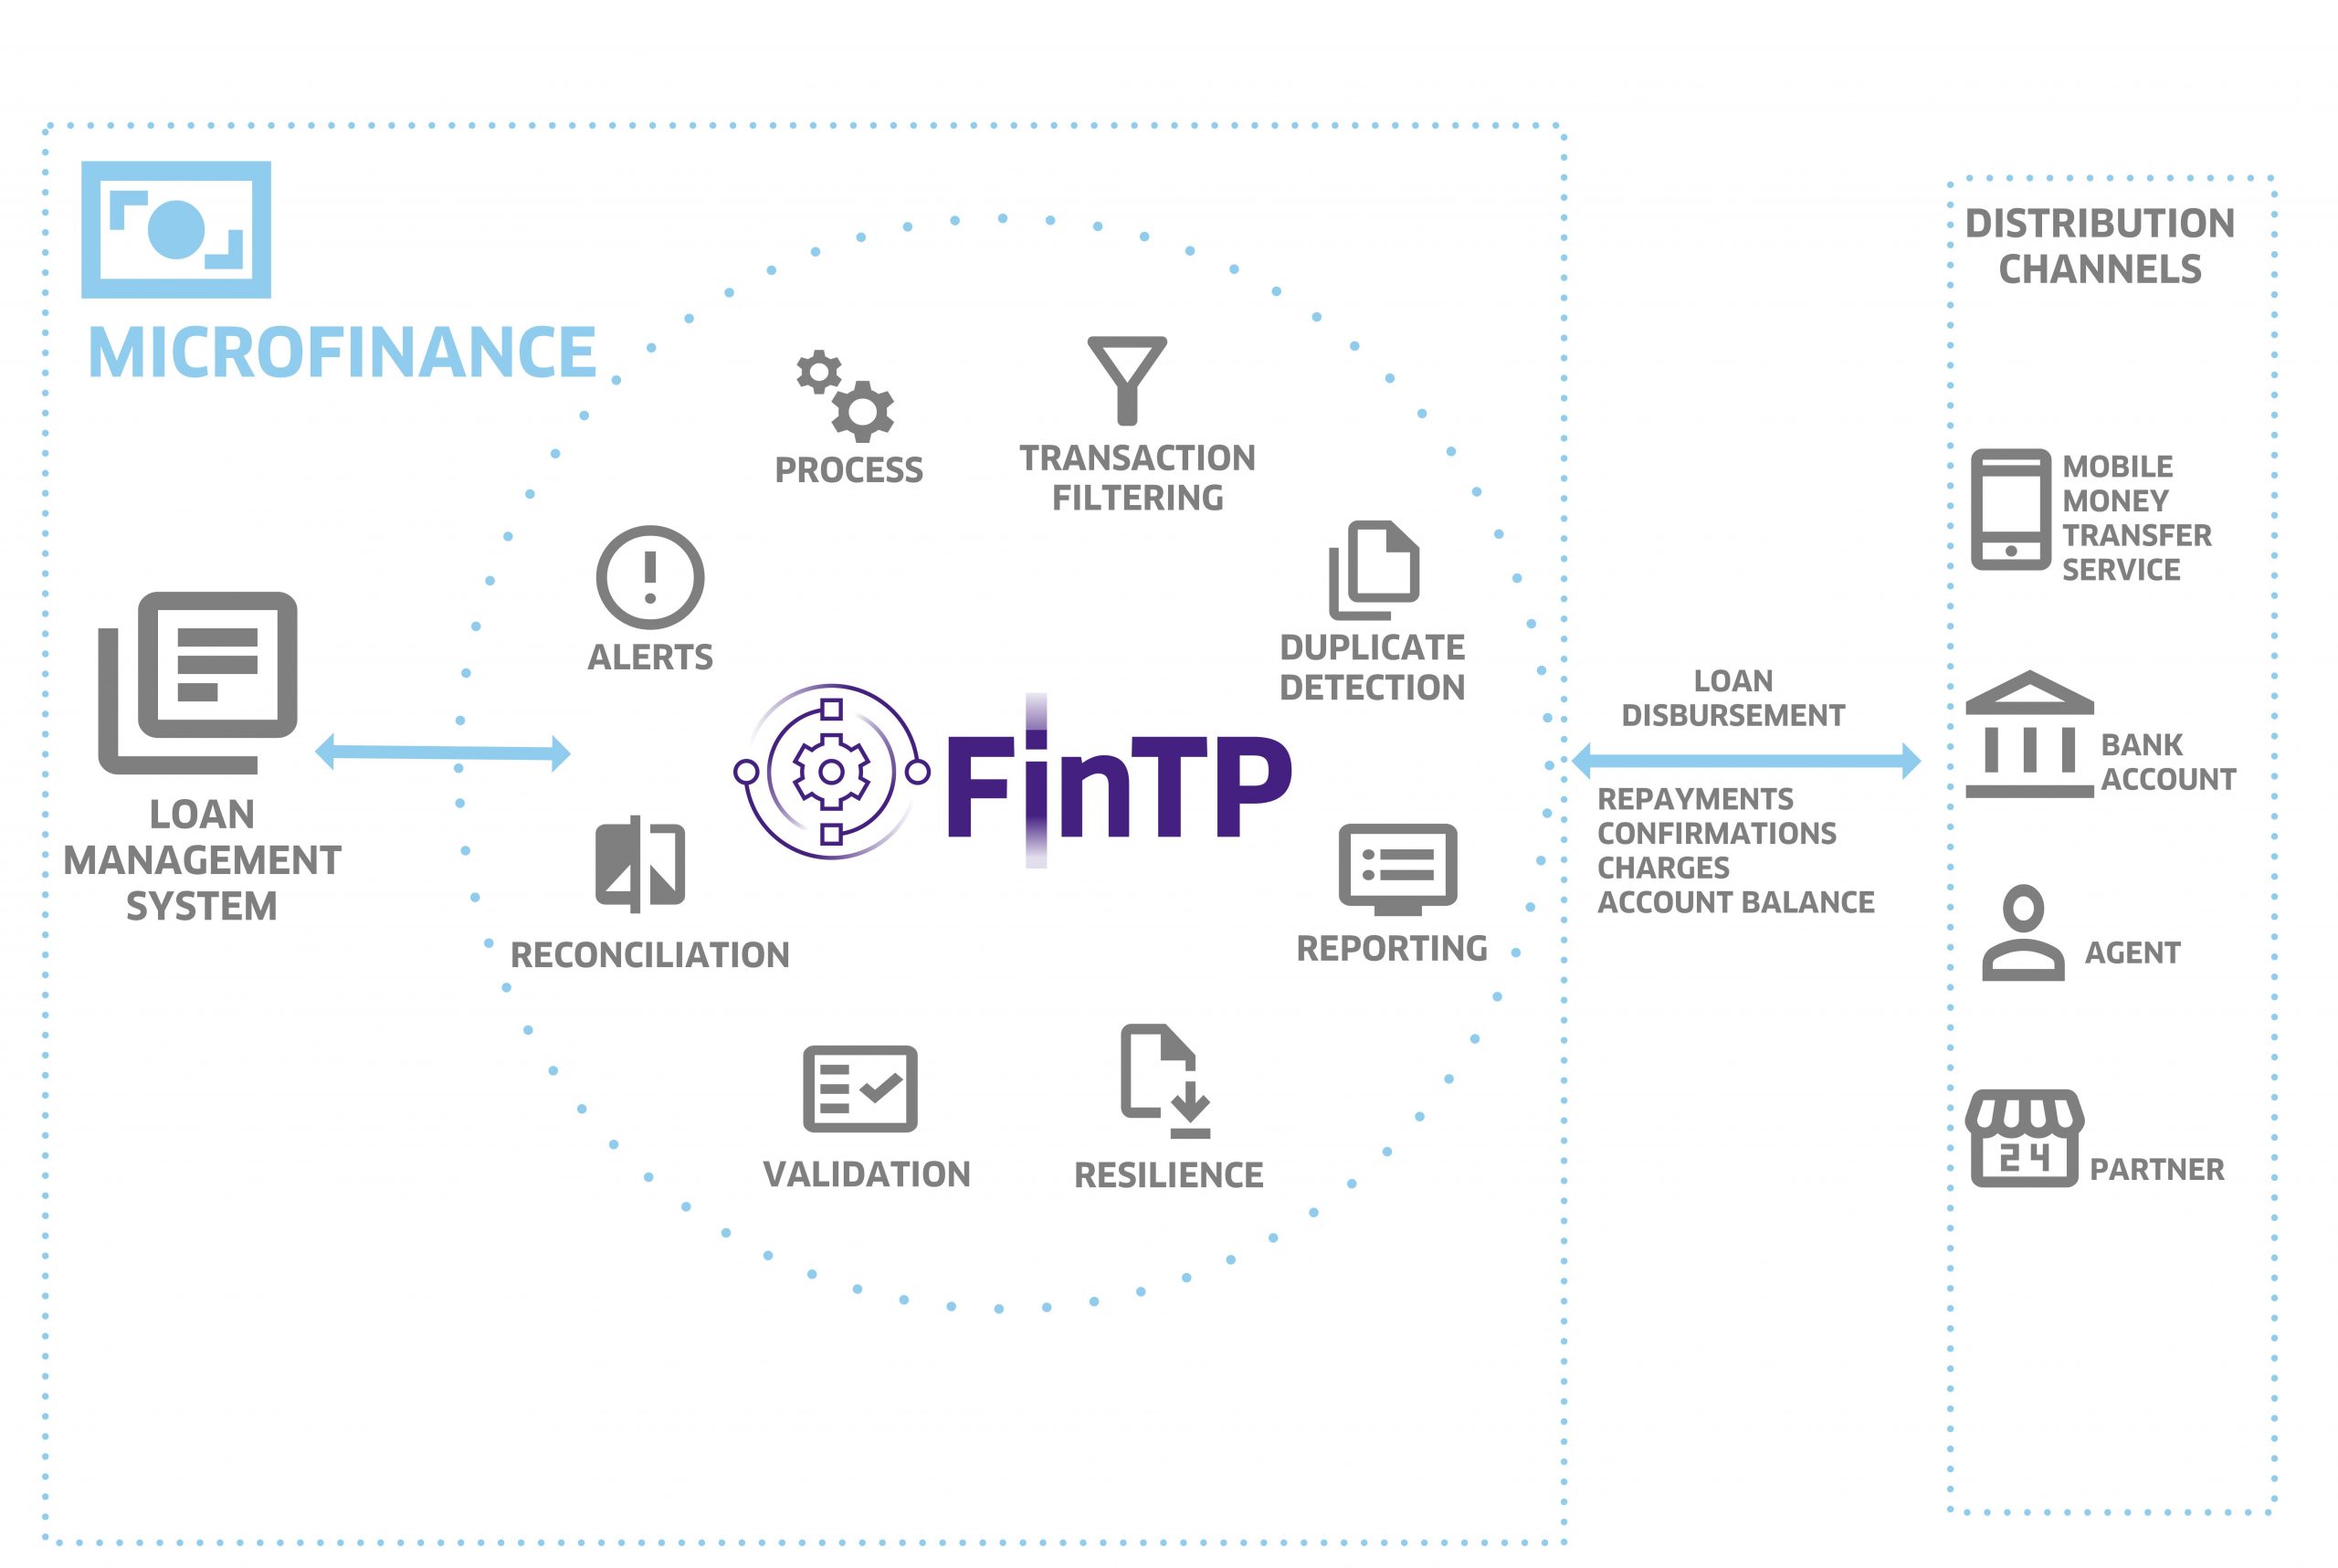 Solution - FinTP for microfinance